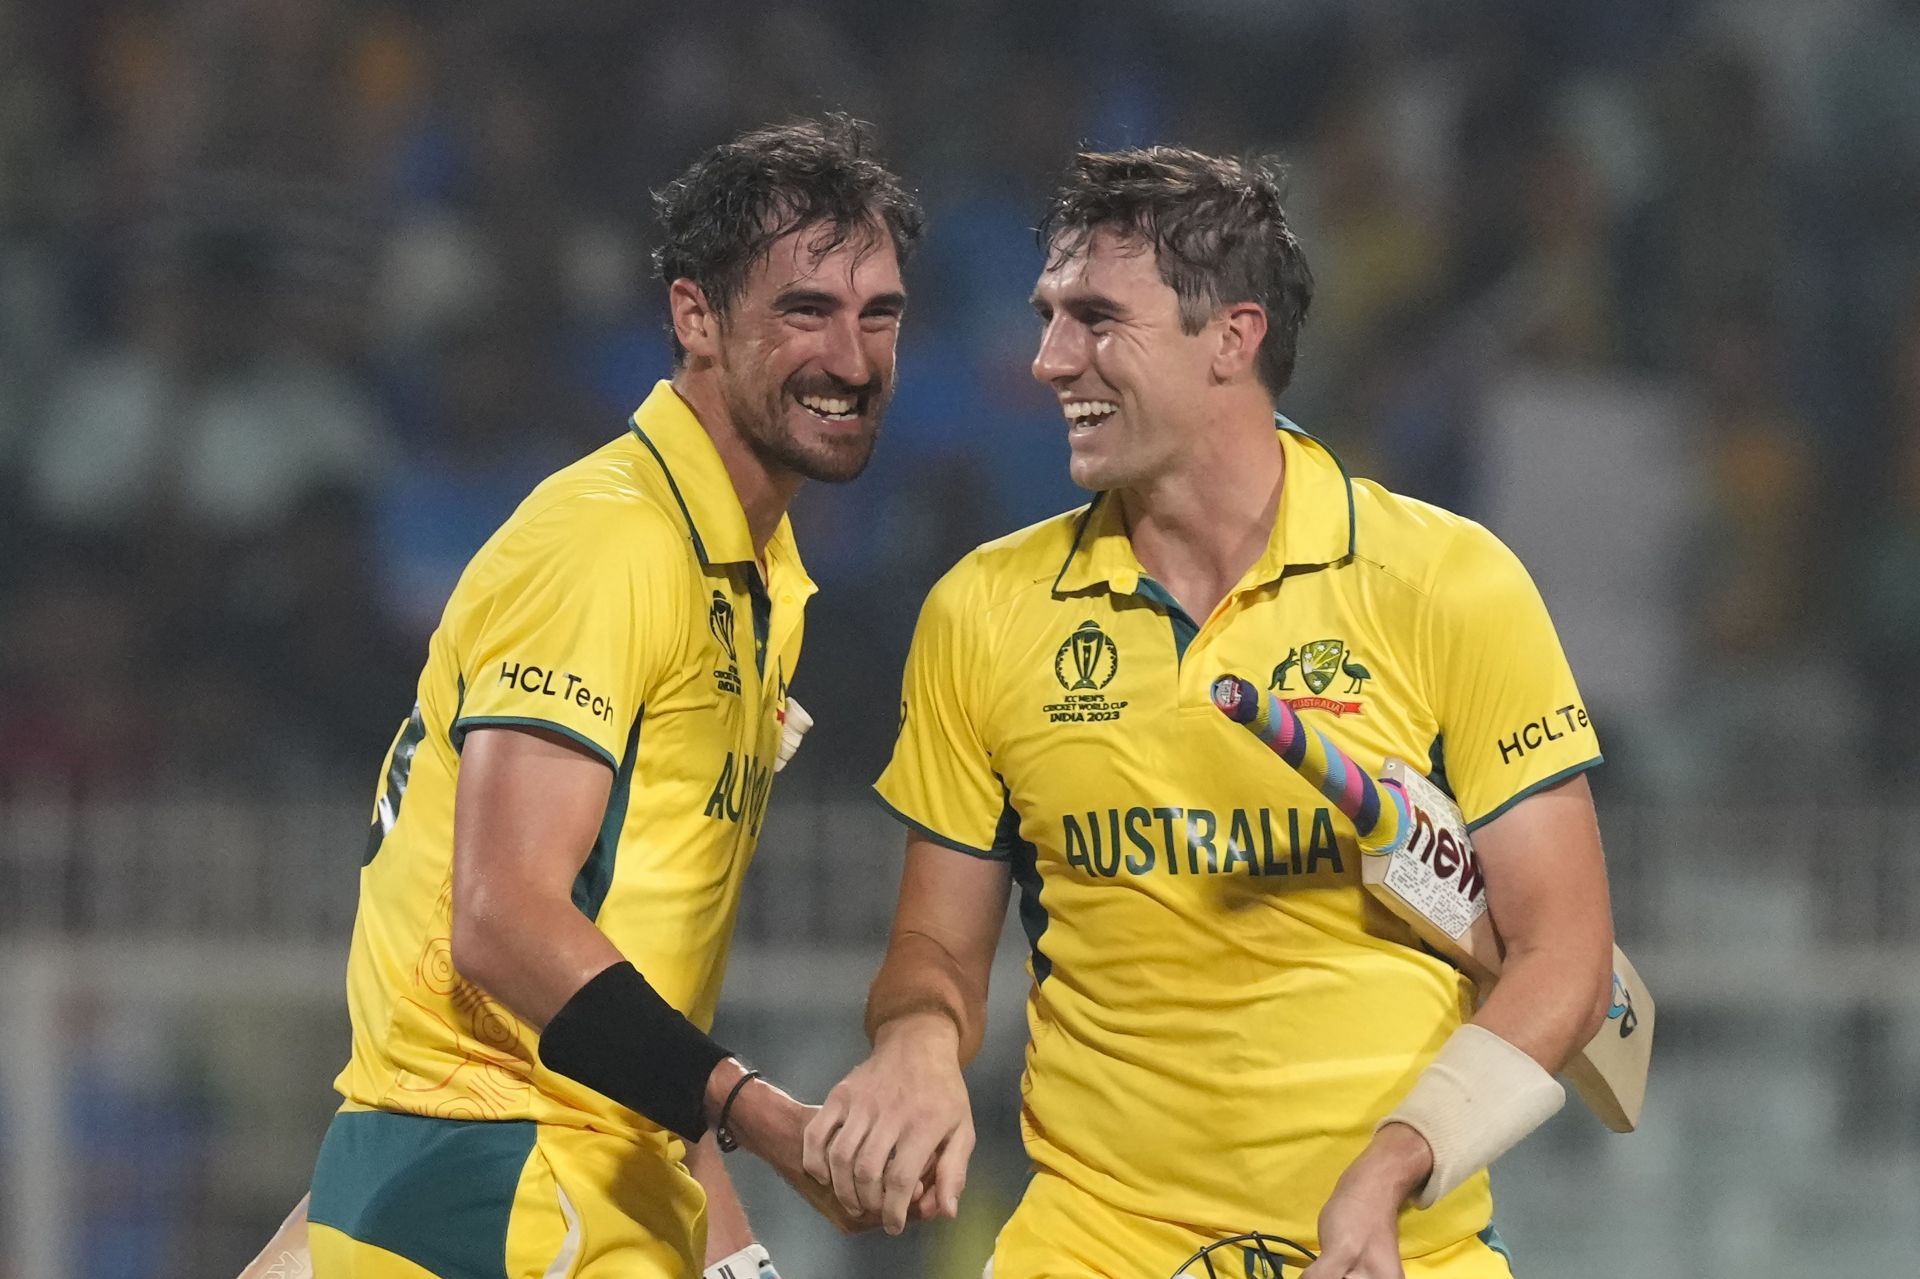 Mitchell Starc and Pat Cummins in jubilation after the win. [Getty Images]